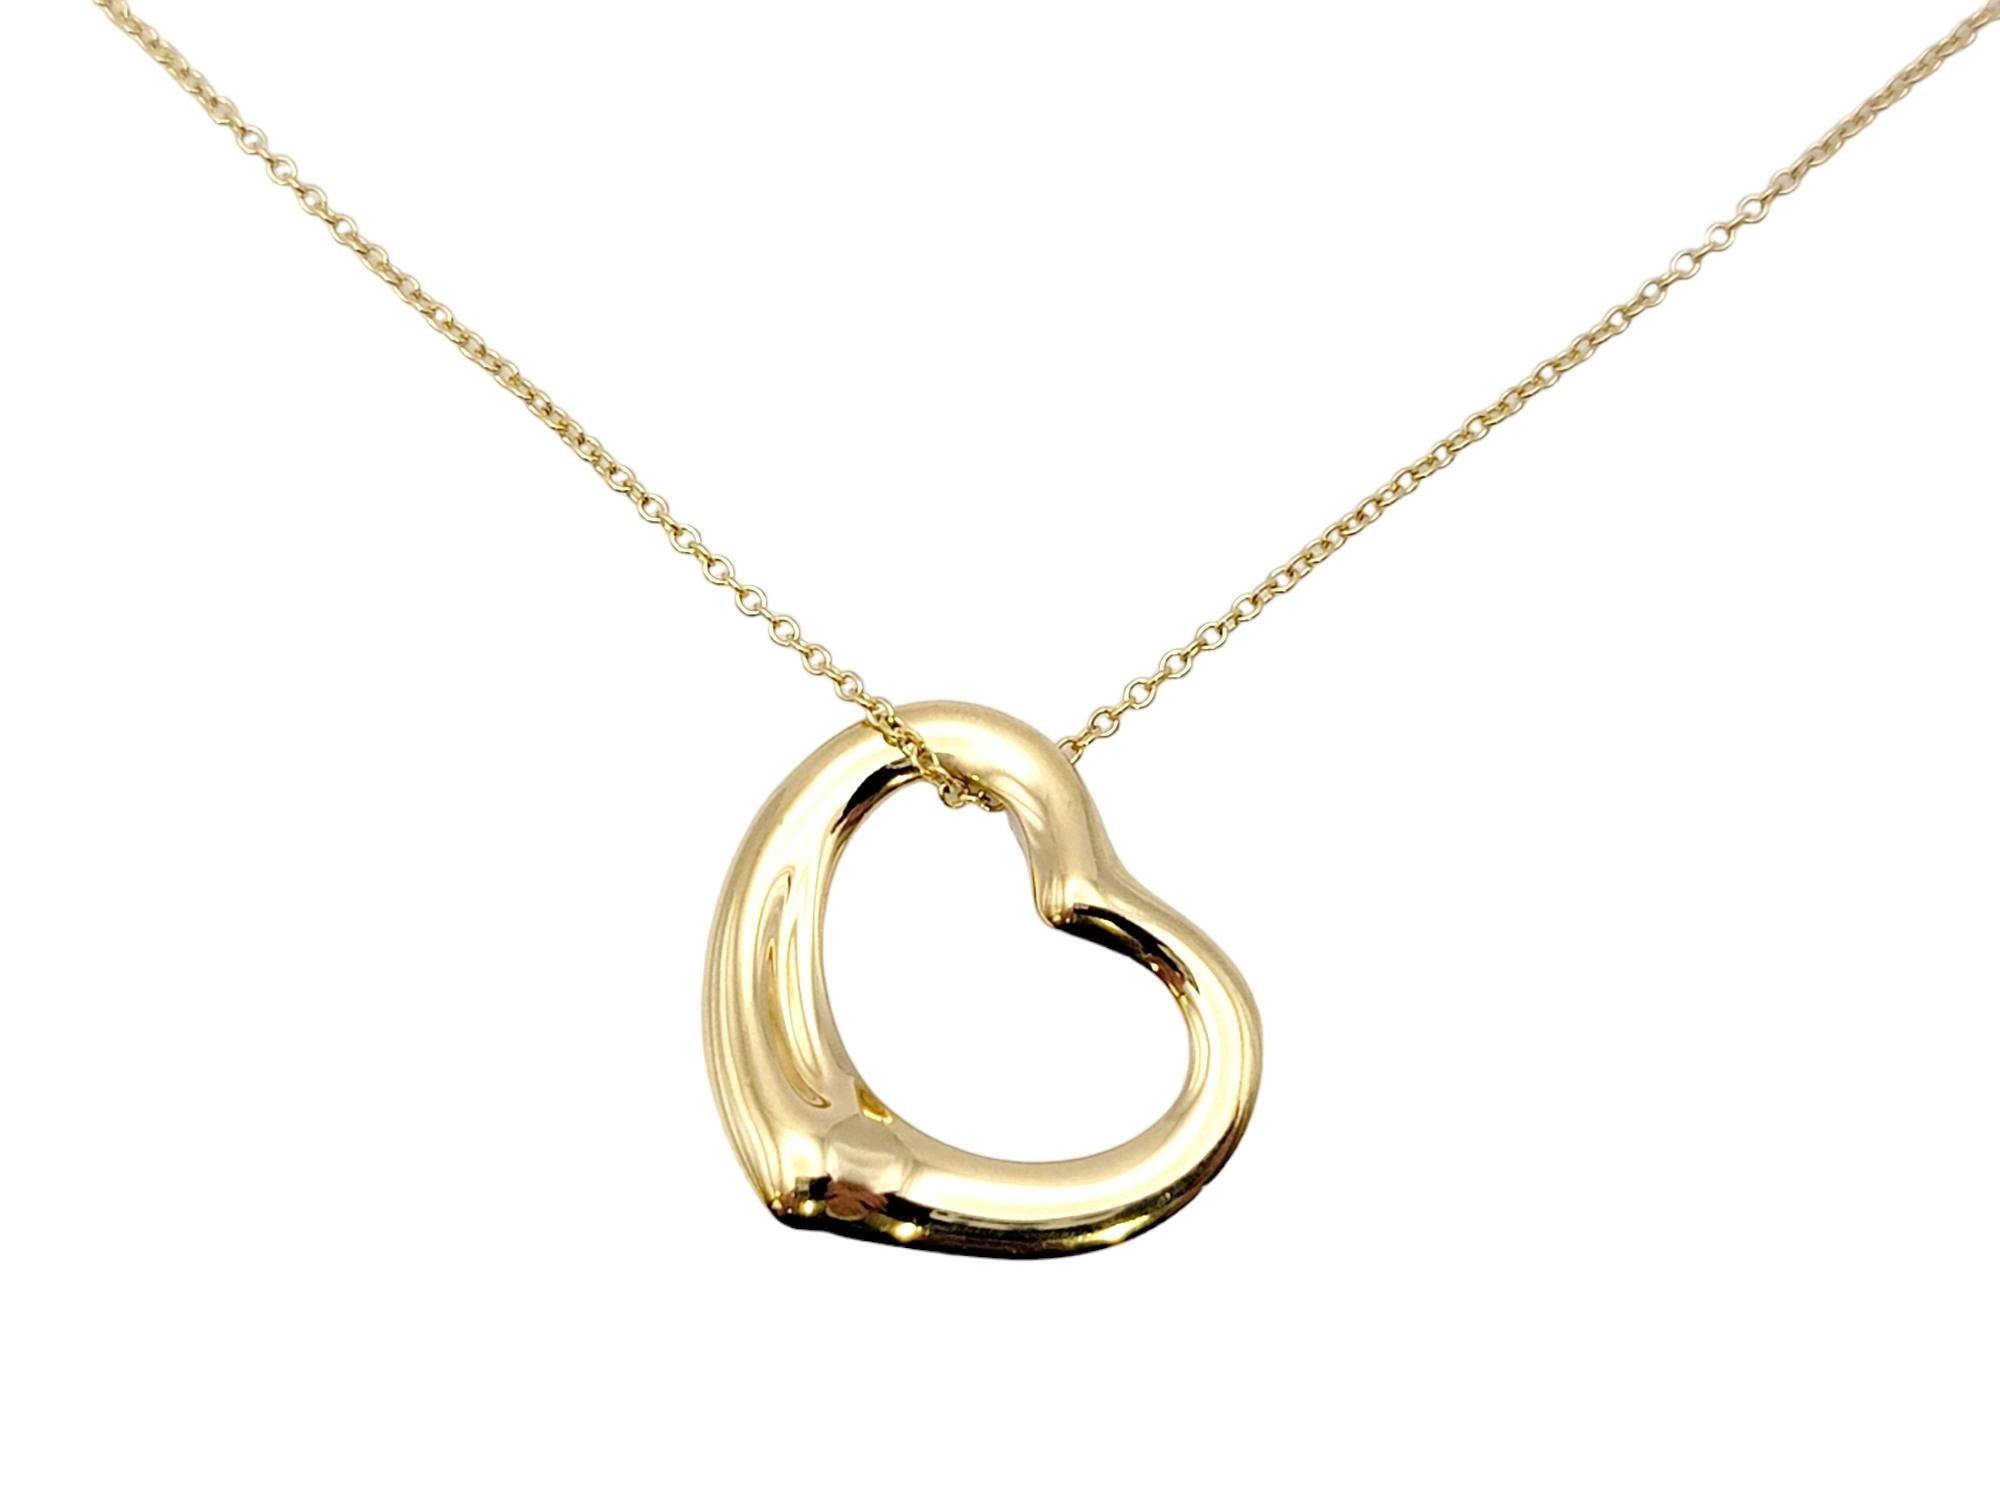 Gorgeous open heart pendant necklace by Elsa Peretti for Tiffany & Co. exudes minimalist elegance. The timeless design combined with the warm yellow gold setting makes for a piece that you will admire for years to come. 

This beautiful designer